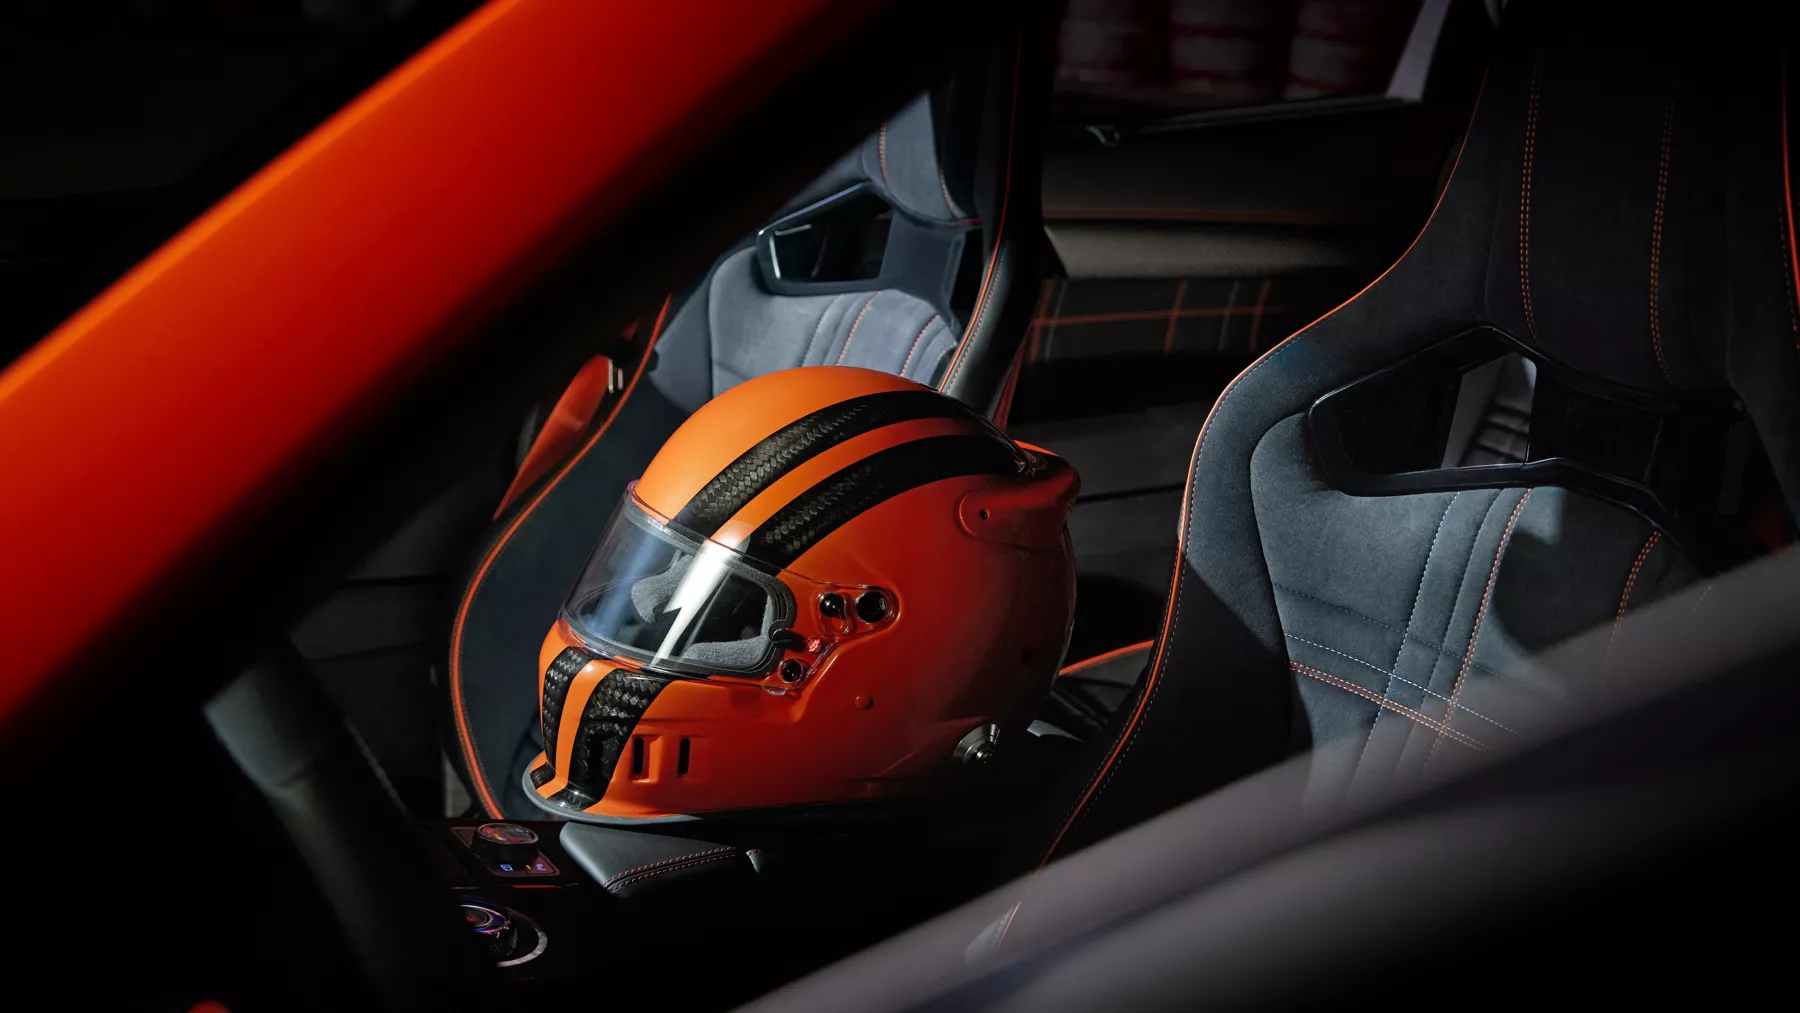 GV80 Coupe Concept interior shot with matching orange racing helmet.